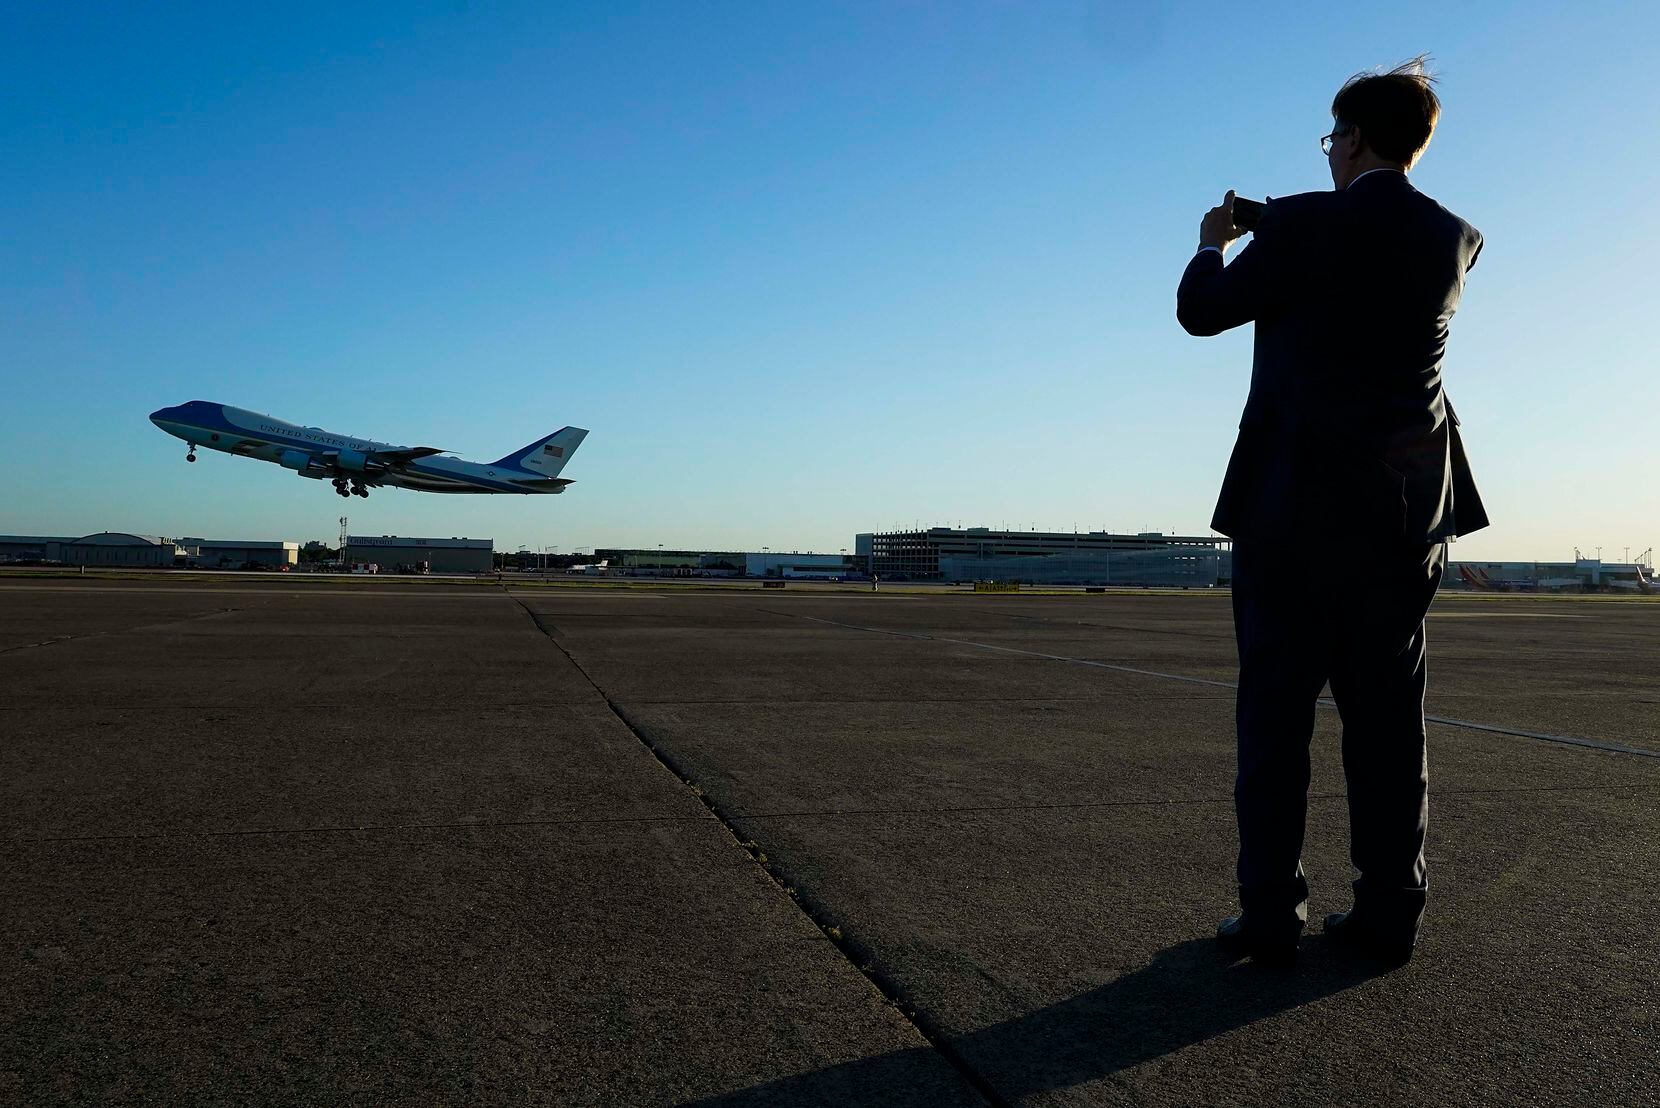 Dan Patrick, Lt.  gov.  of Texas, photographs Air Force One taking off from Dallas Love Field...